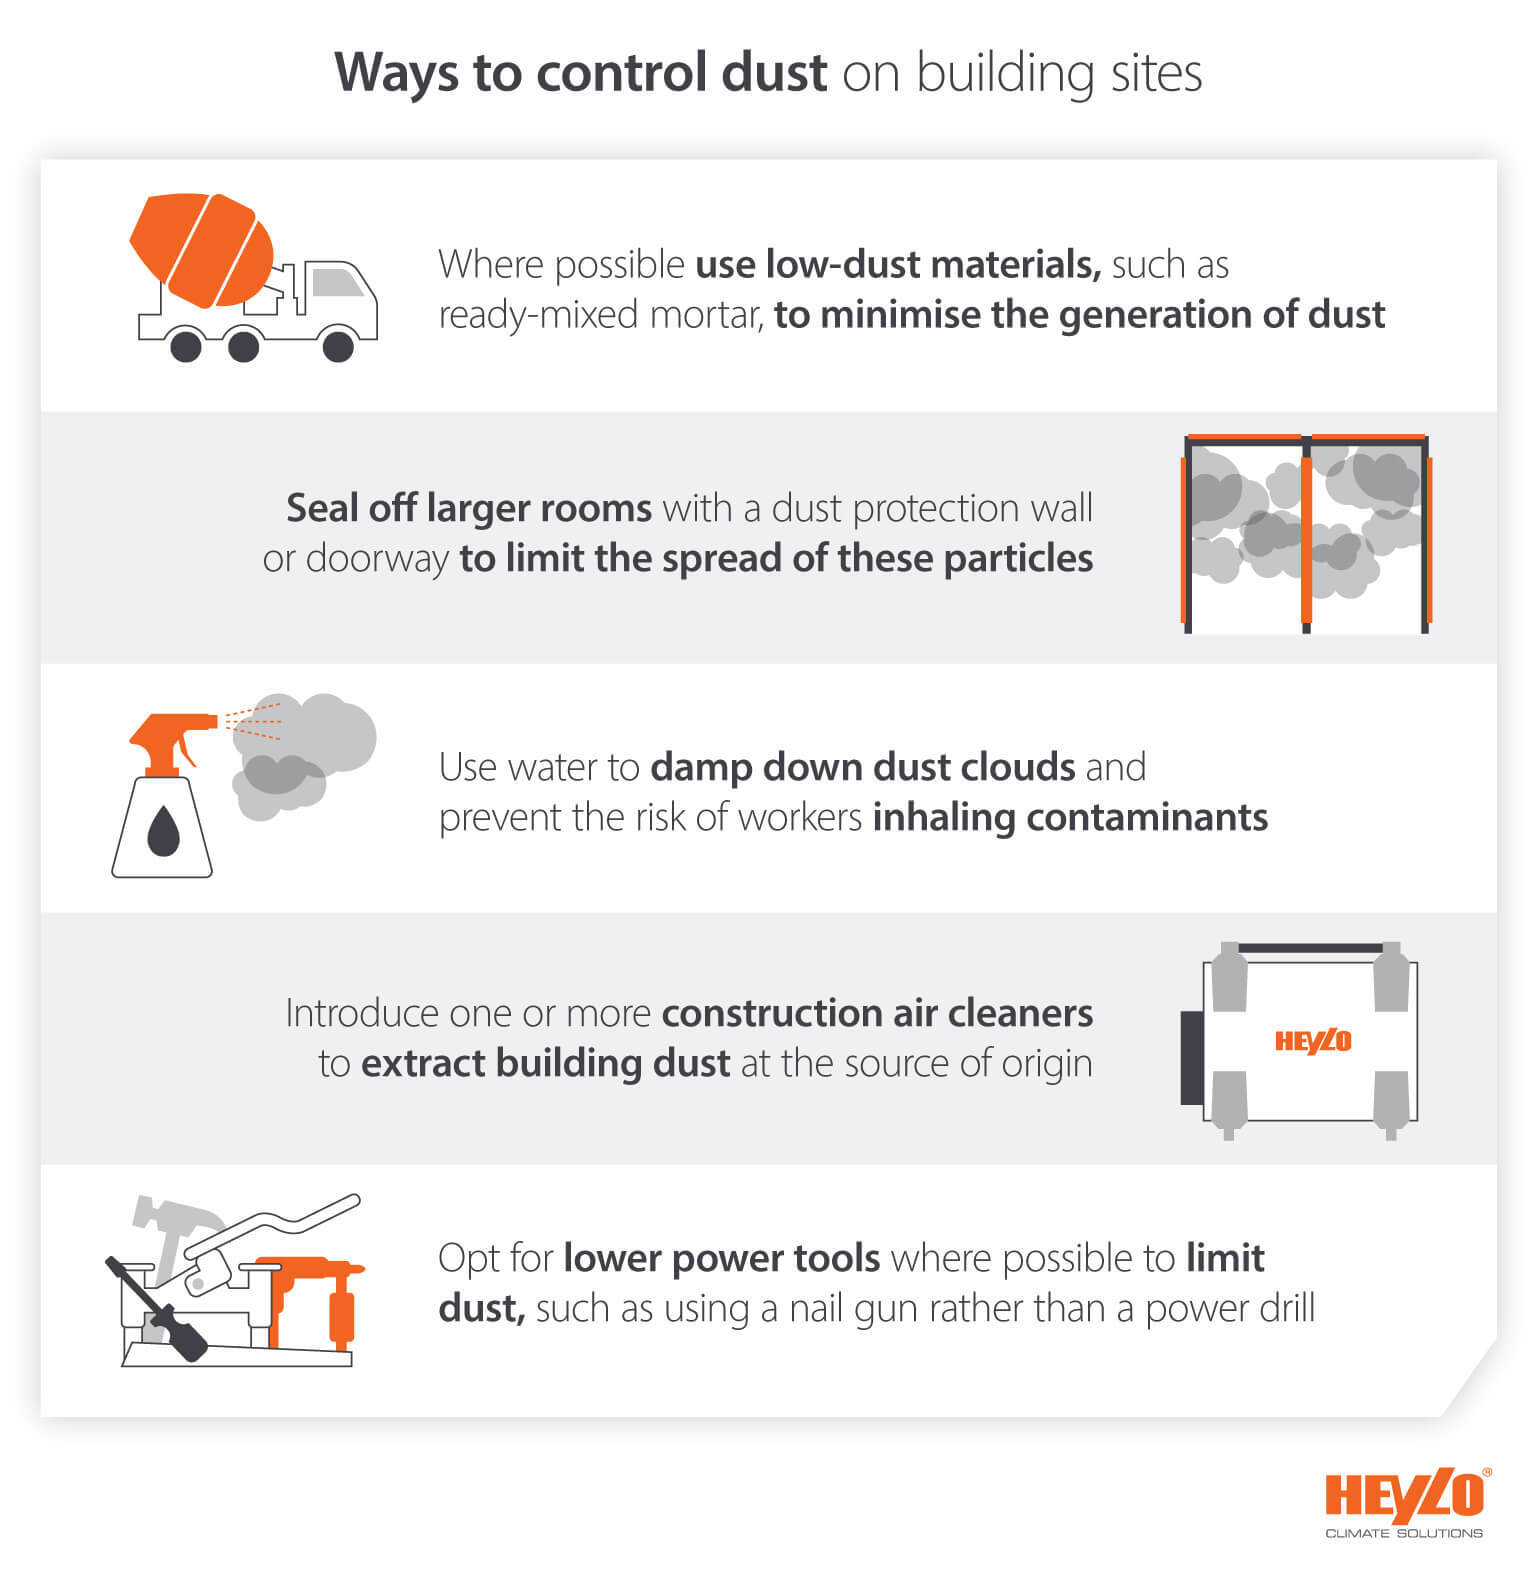 Image showing construction dust control methods and advice to reduce the spread of particles